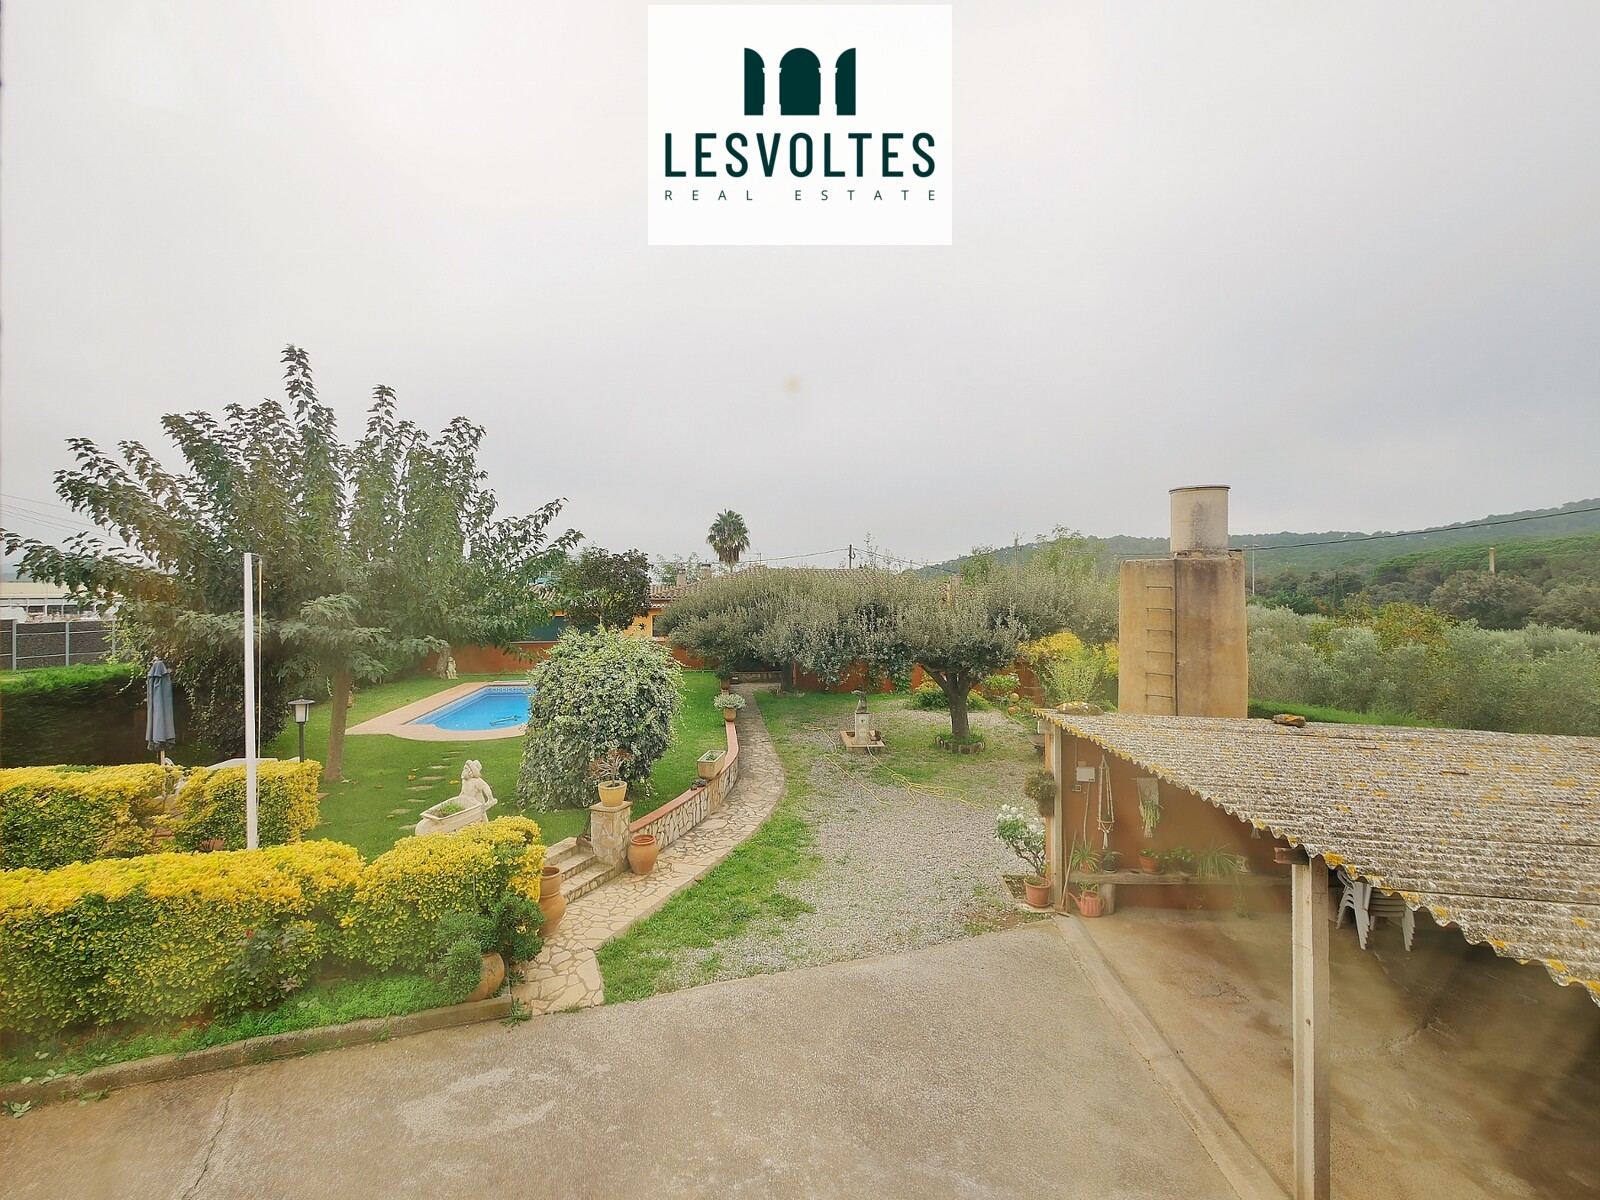 MAGNIFICENT SINGLE-FAMILY HOUSE WITH LARGE 3,300 M2 LAND FOR SALE IN MONTRÀS. FINCA WITH MANY POSSIBILITIES.